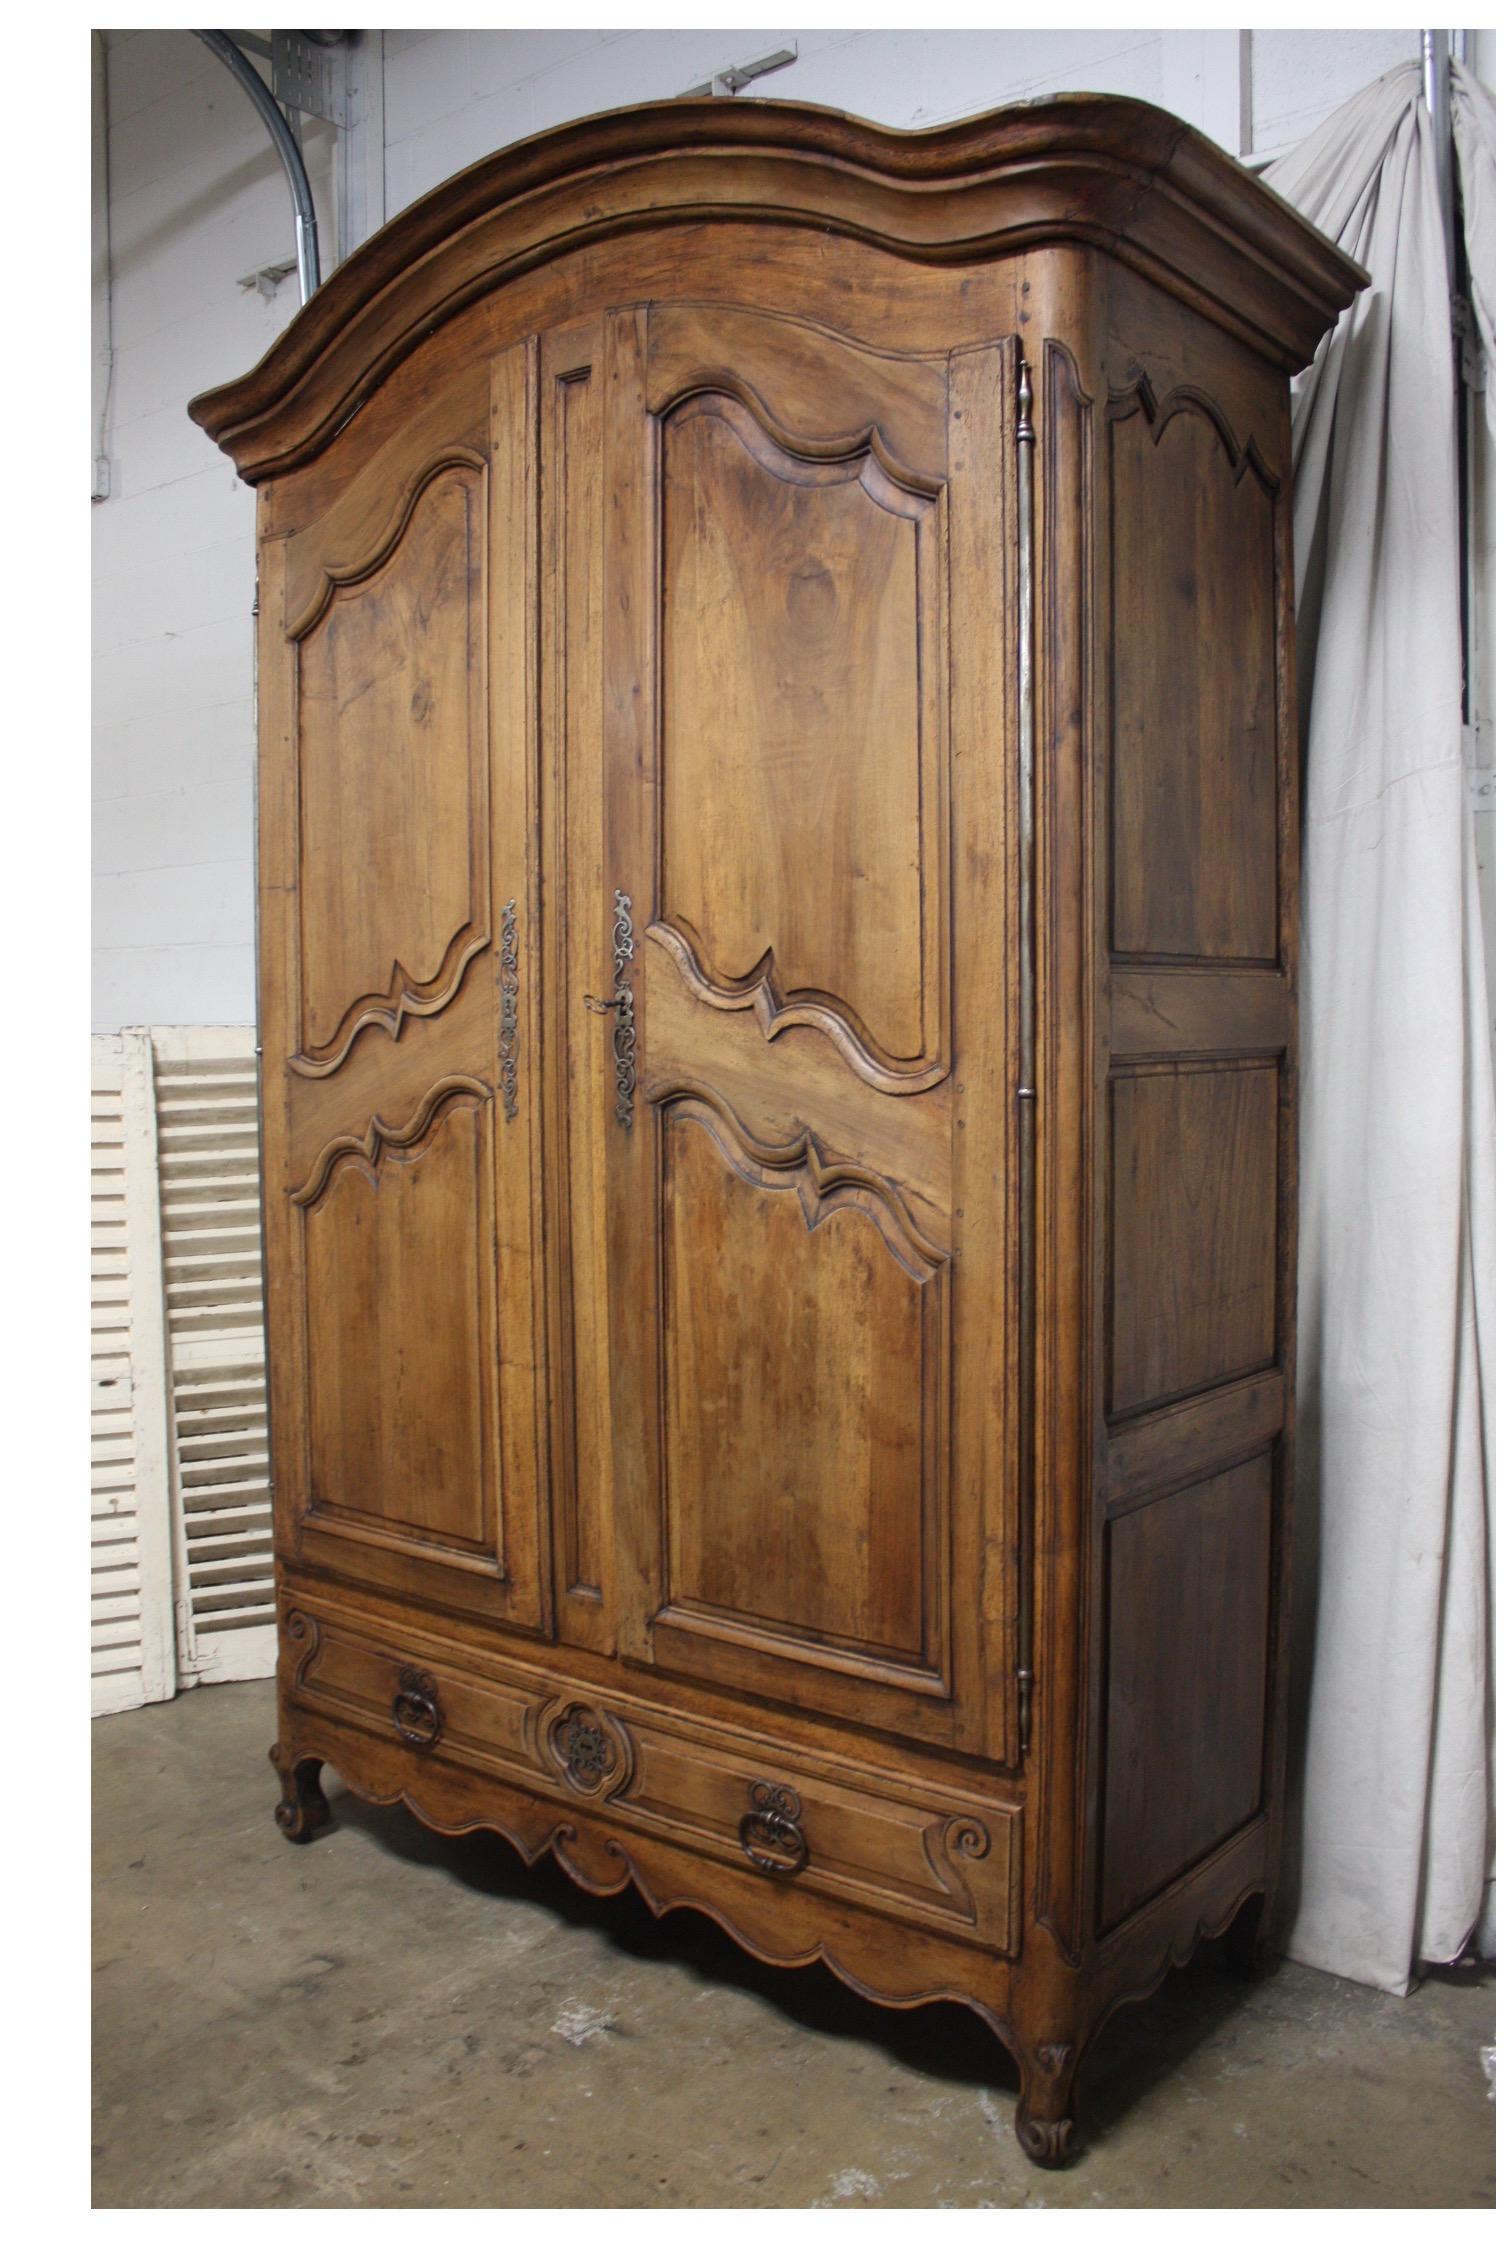 Magnificent early 18th century French armoire.